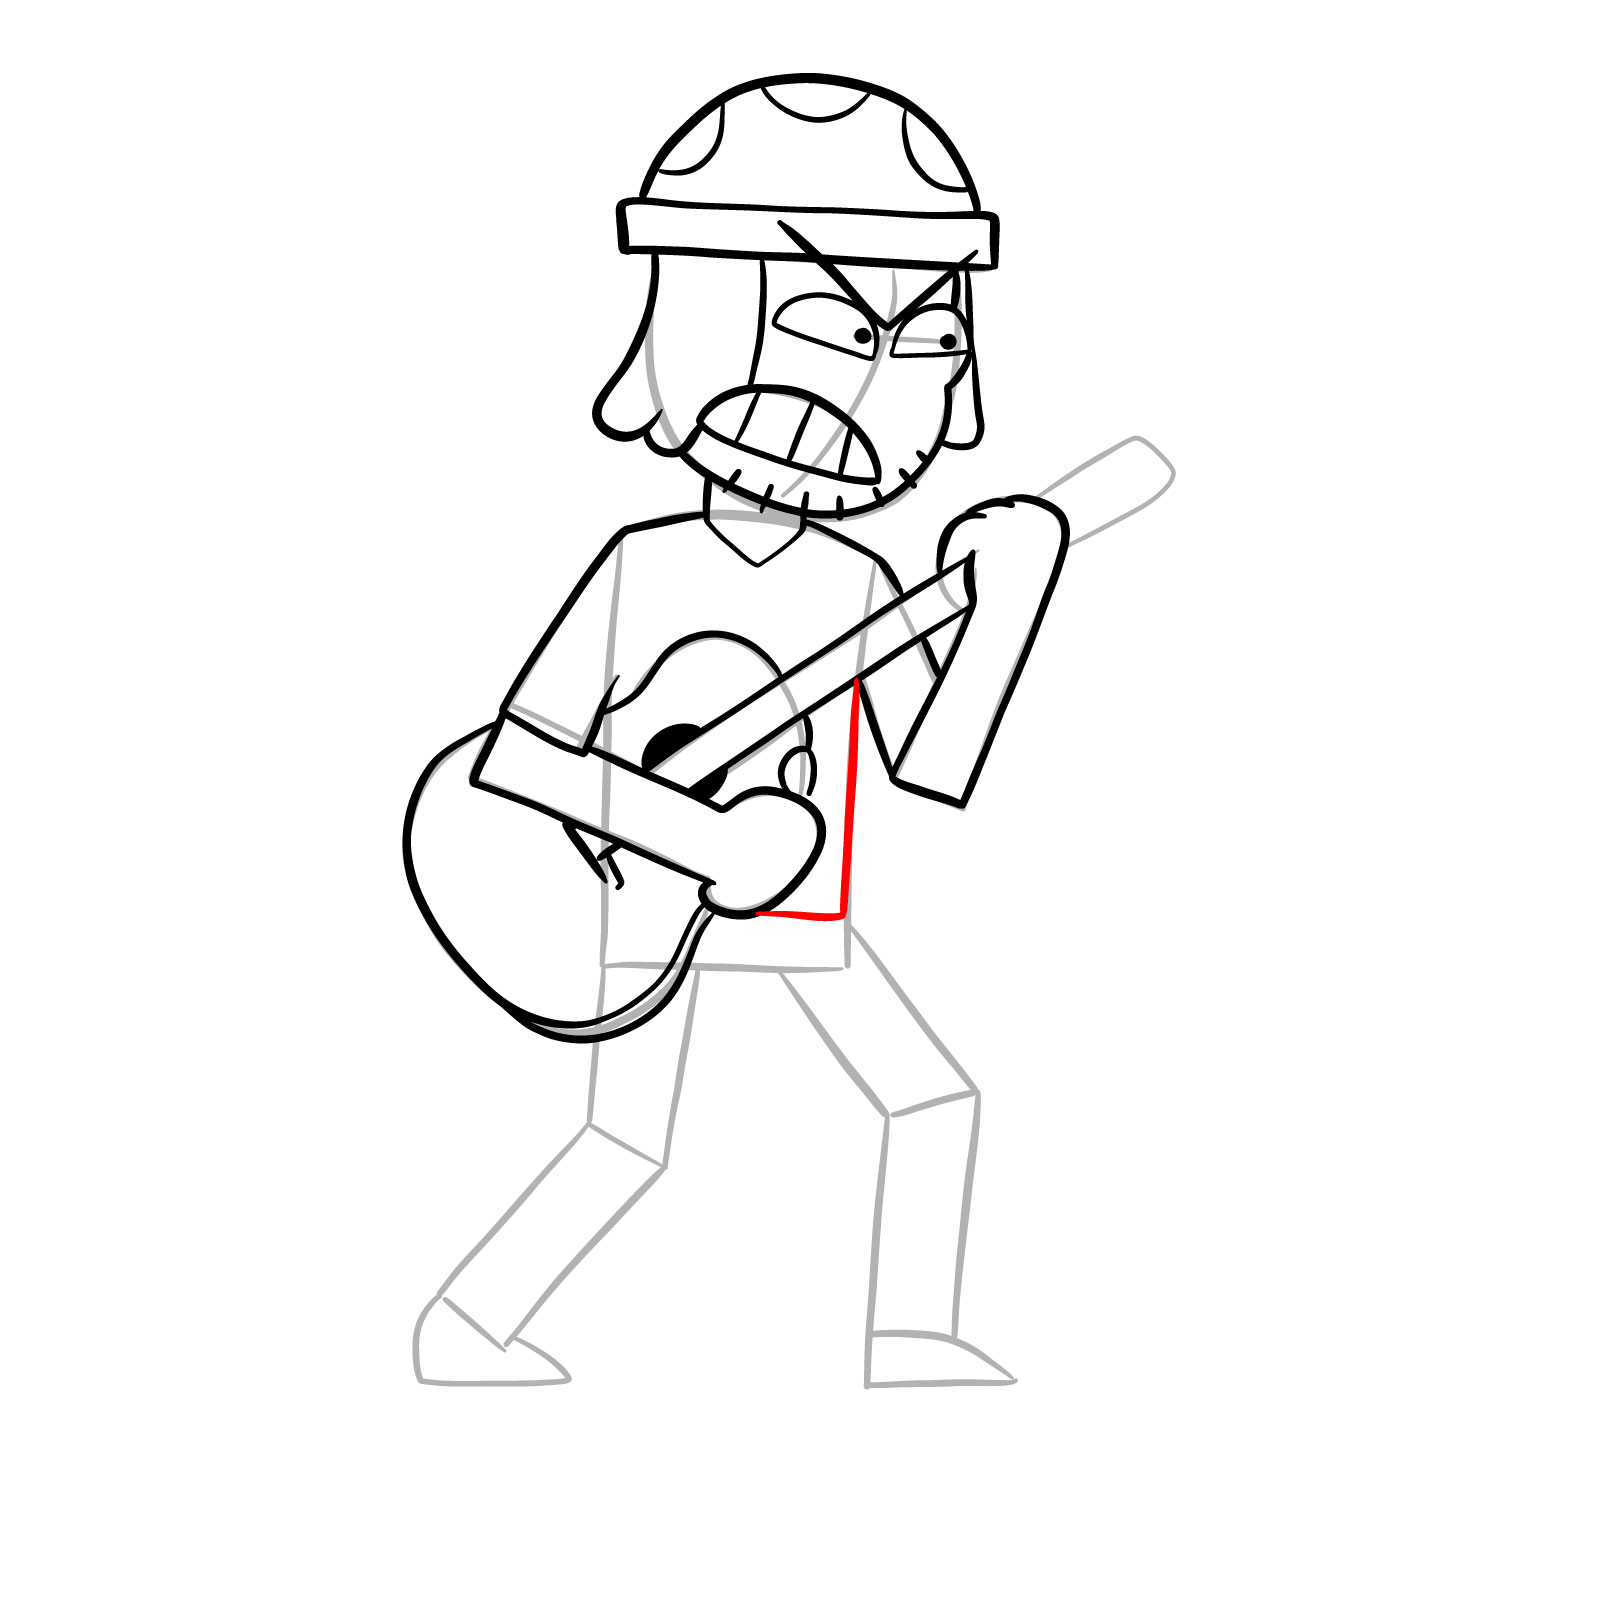 How to draw Suction Cup Man with a guitar - step 19